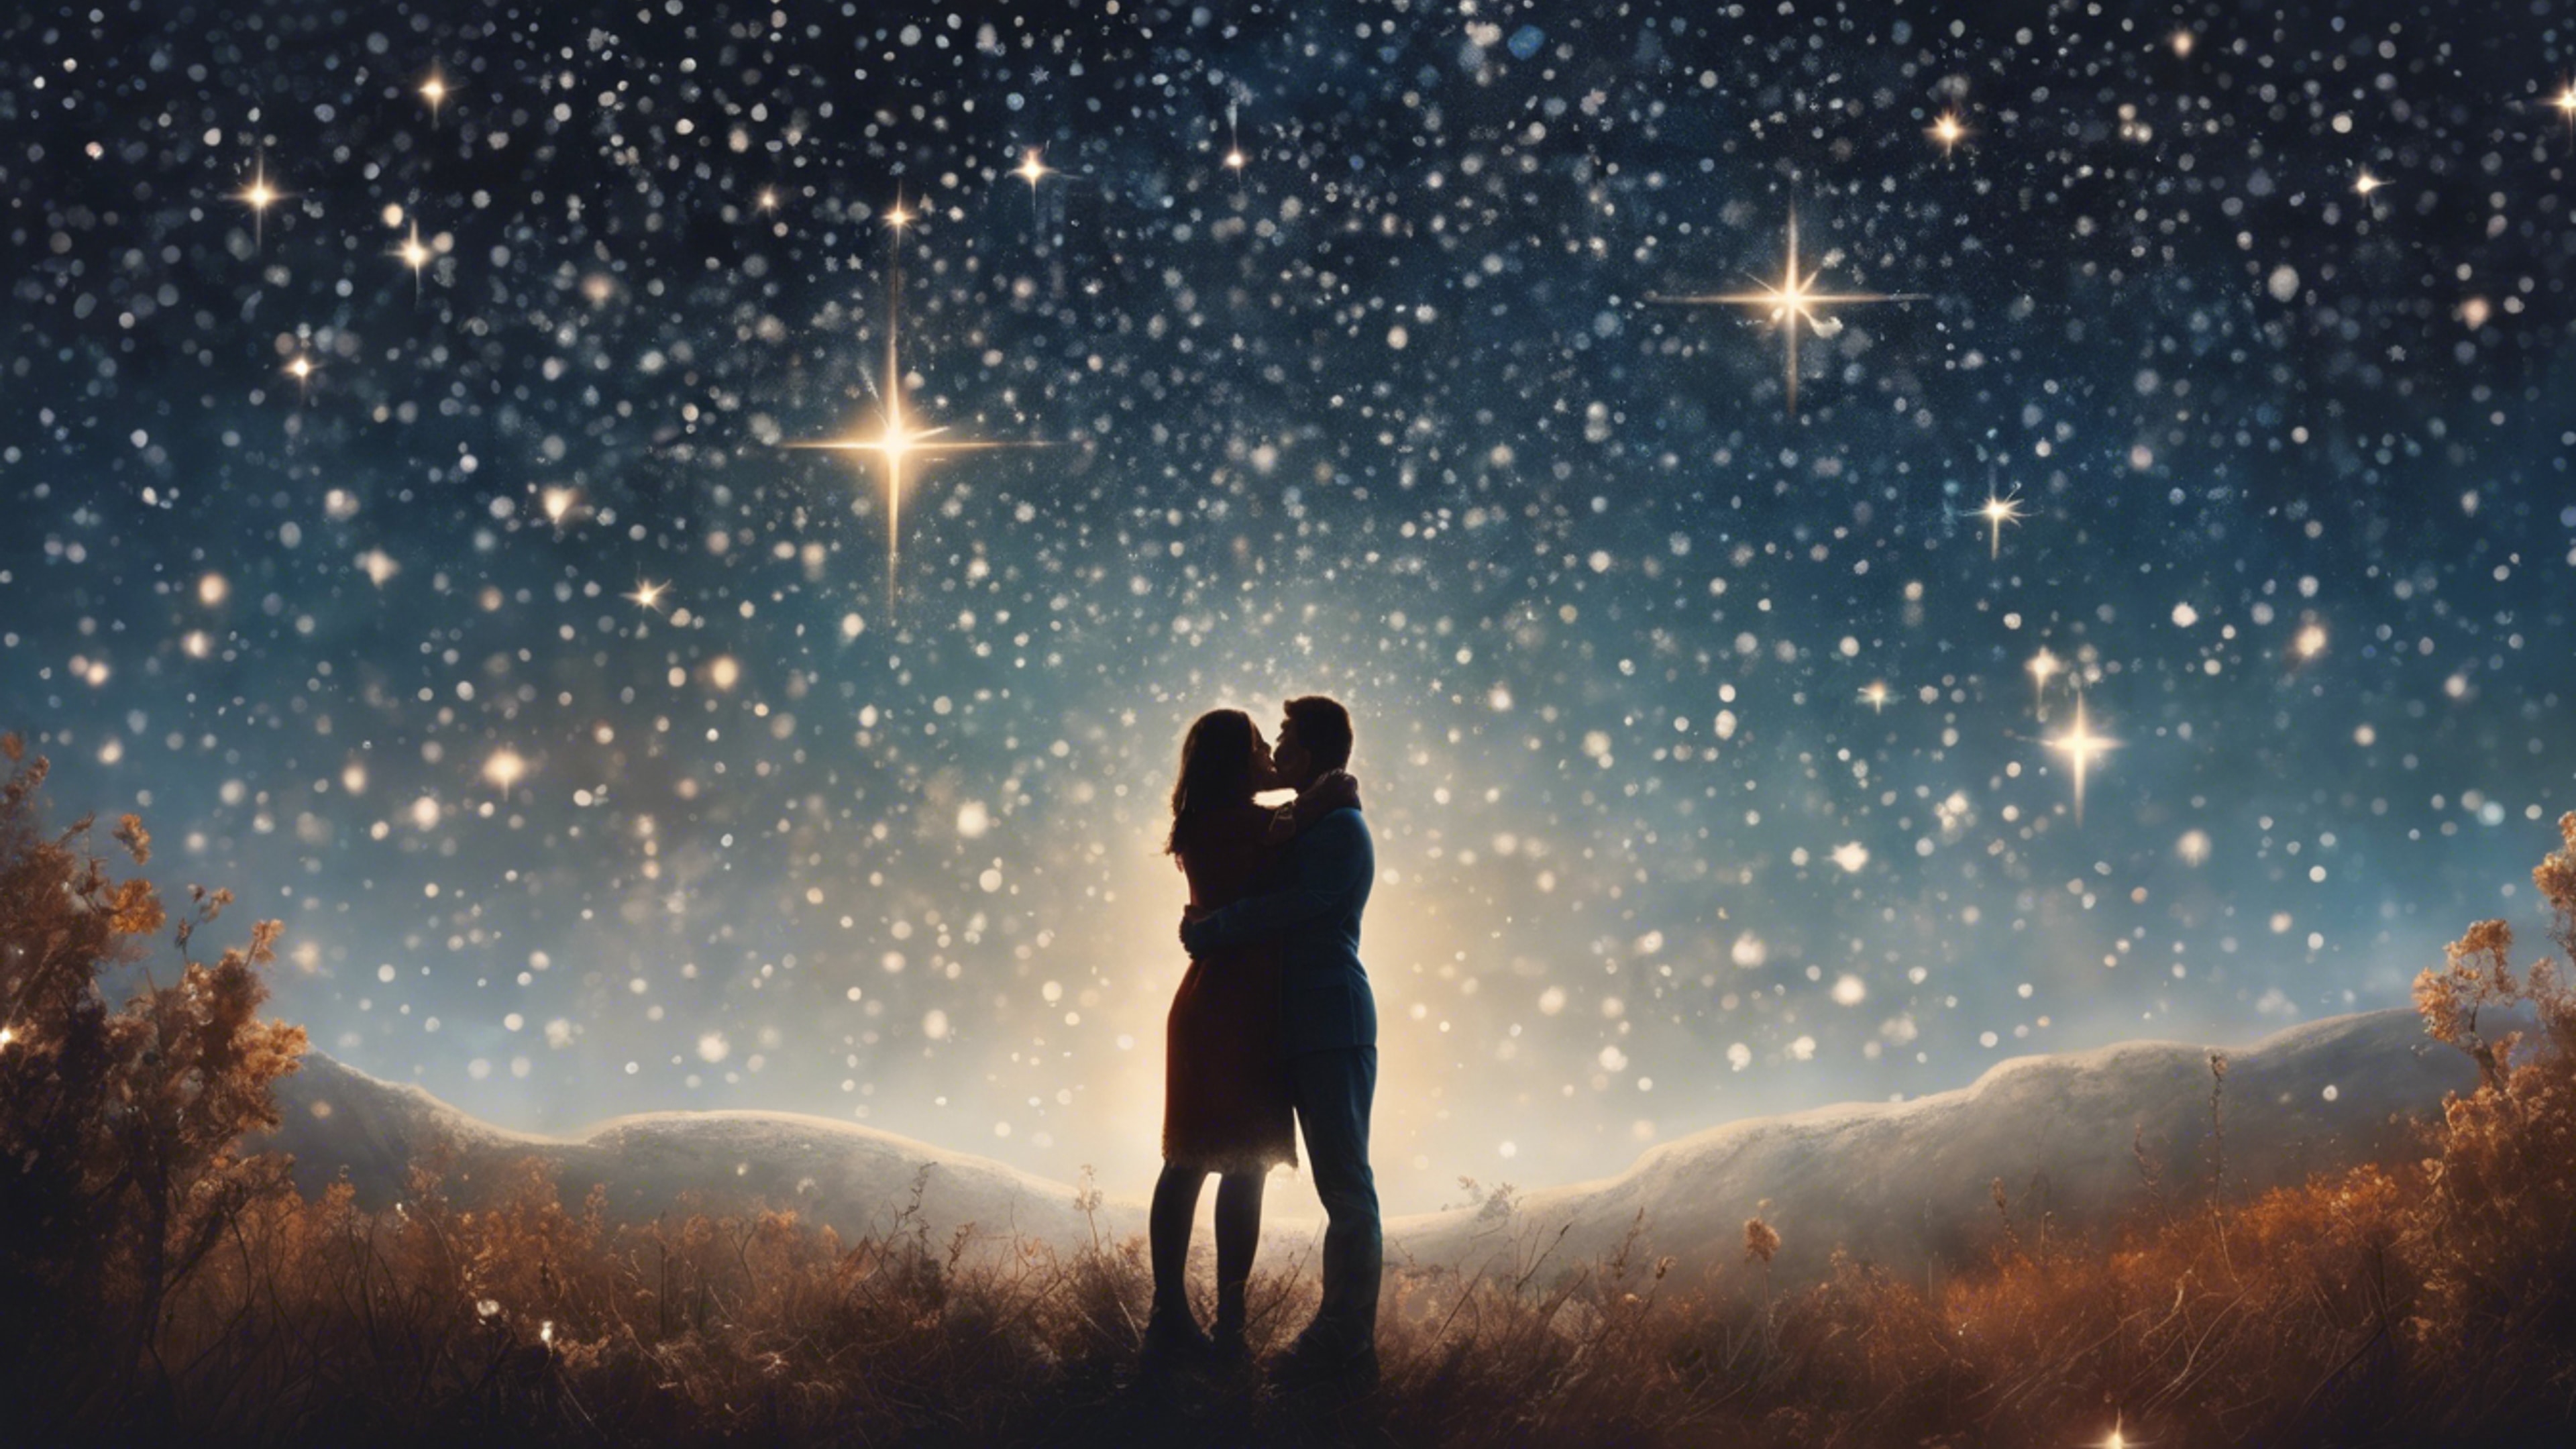 A timeless painting of a couple sharing a romantic moment under a star-filled sky. 牆紙[26fb6f637c3e4c759c8d]